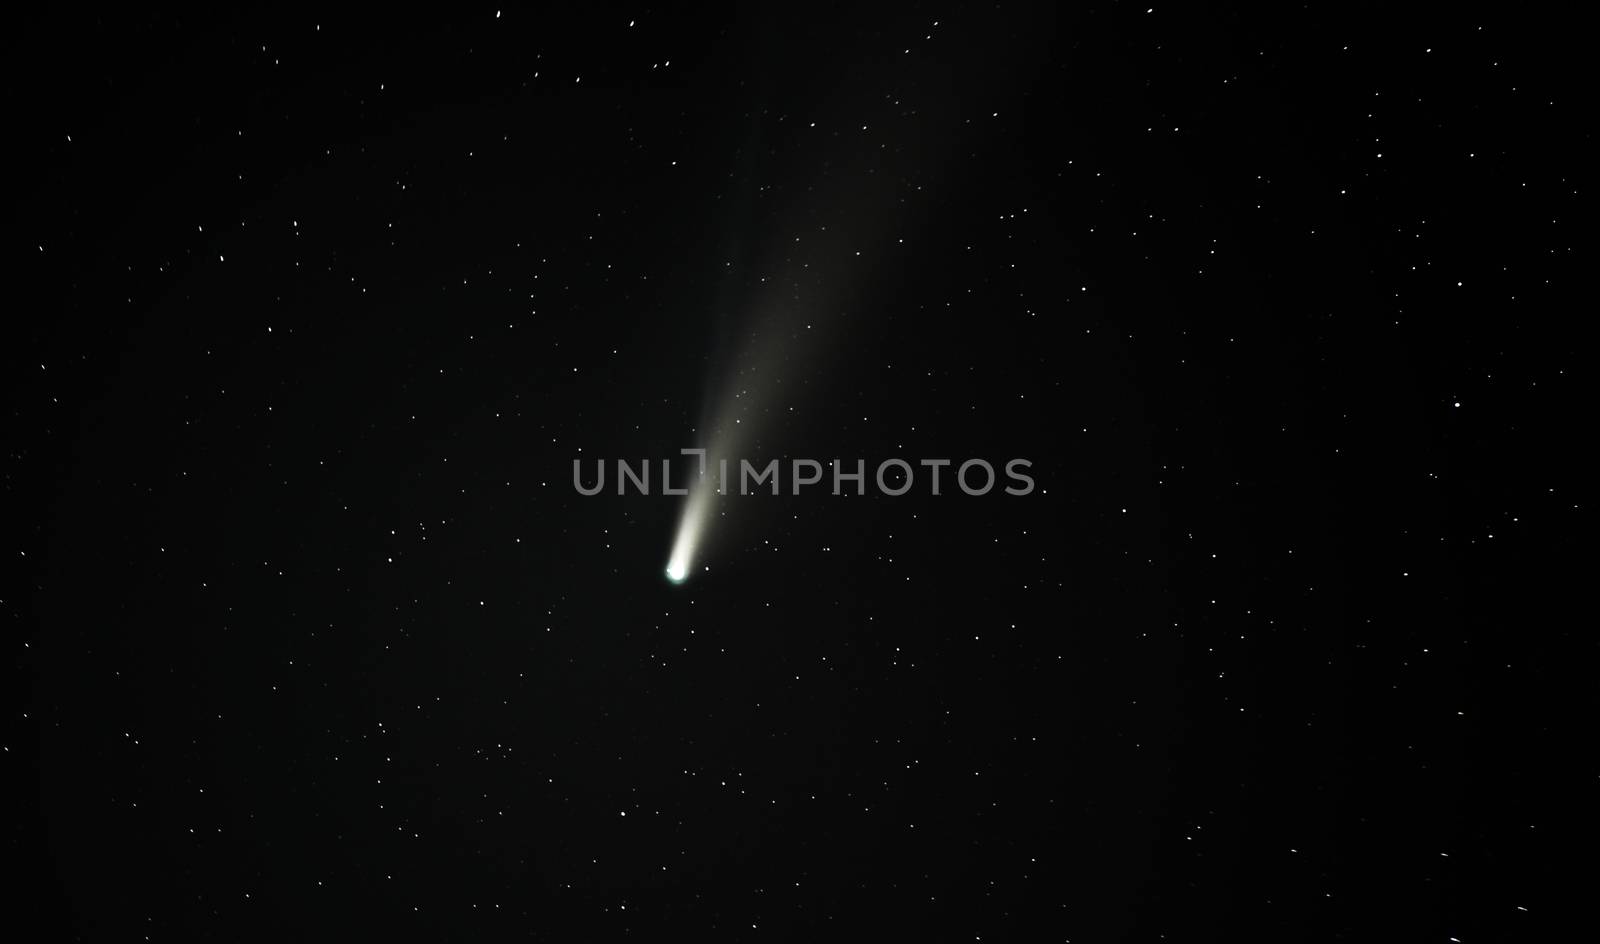 Comet NEOWISE by PhotoWorks